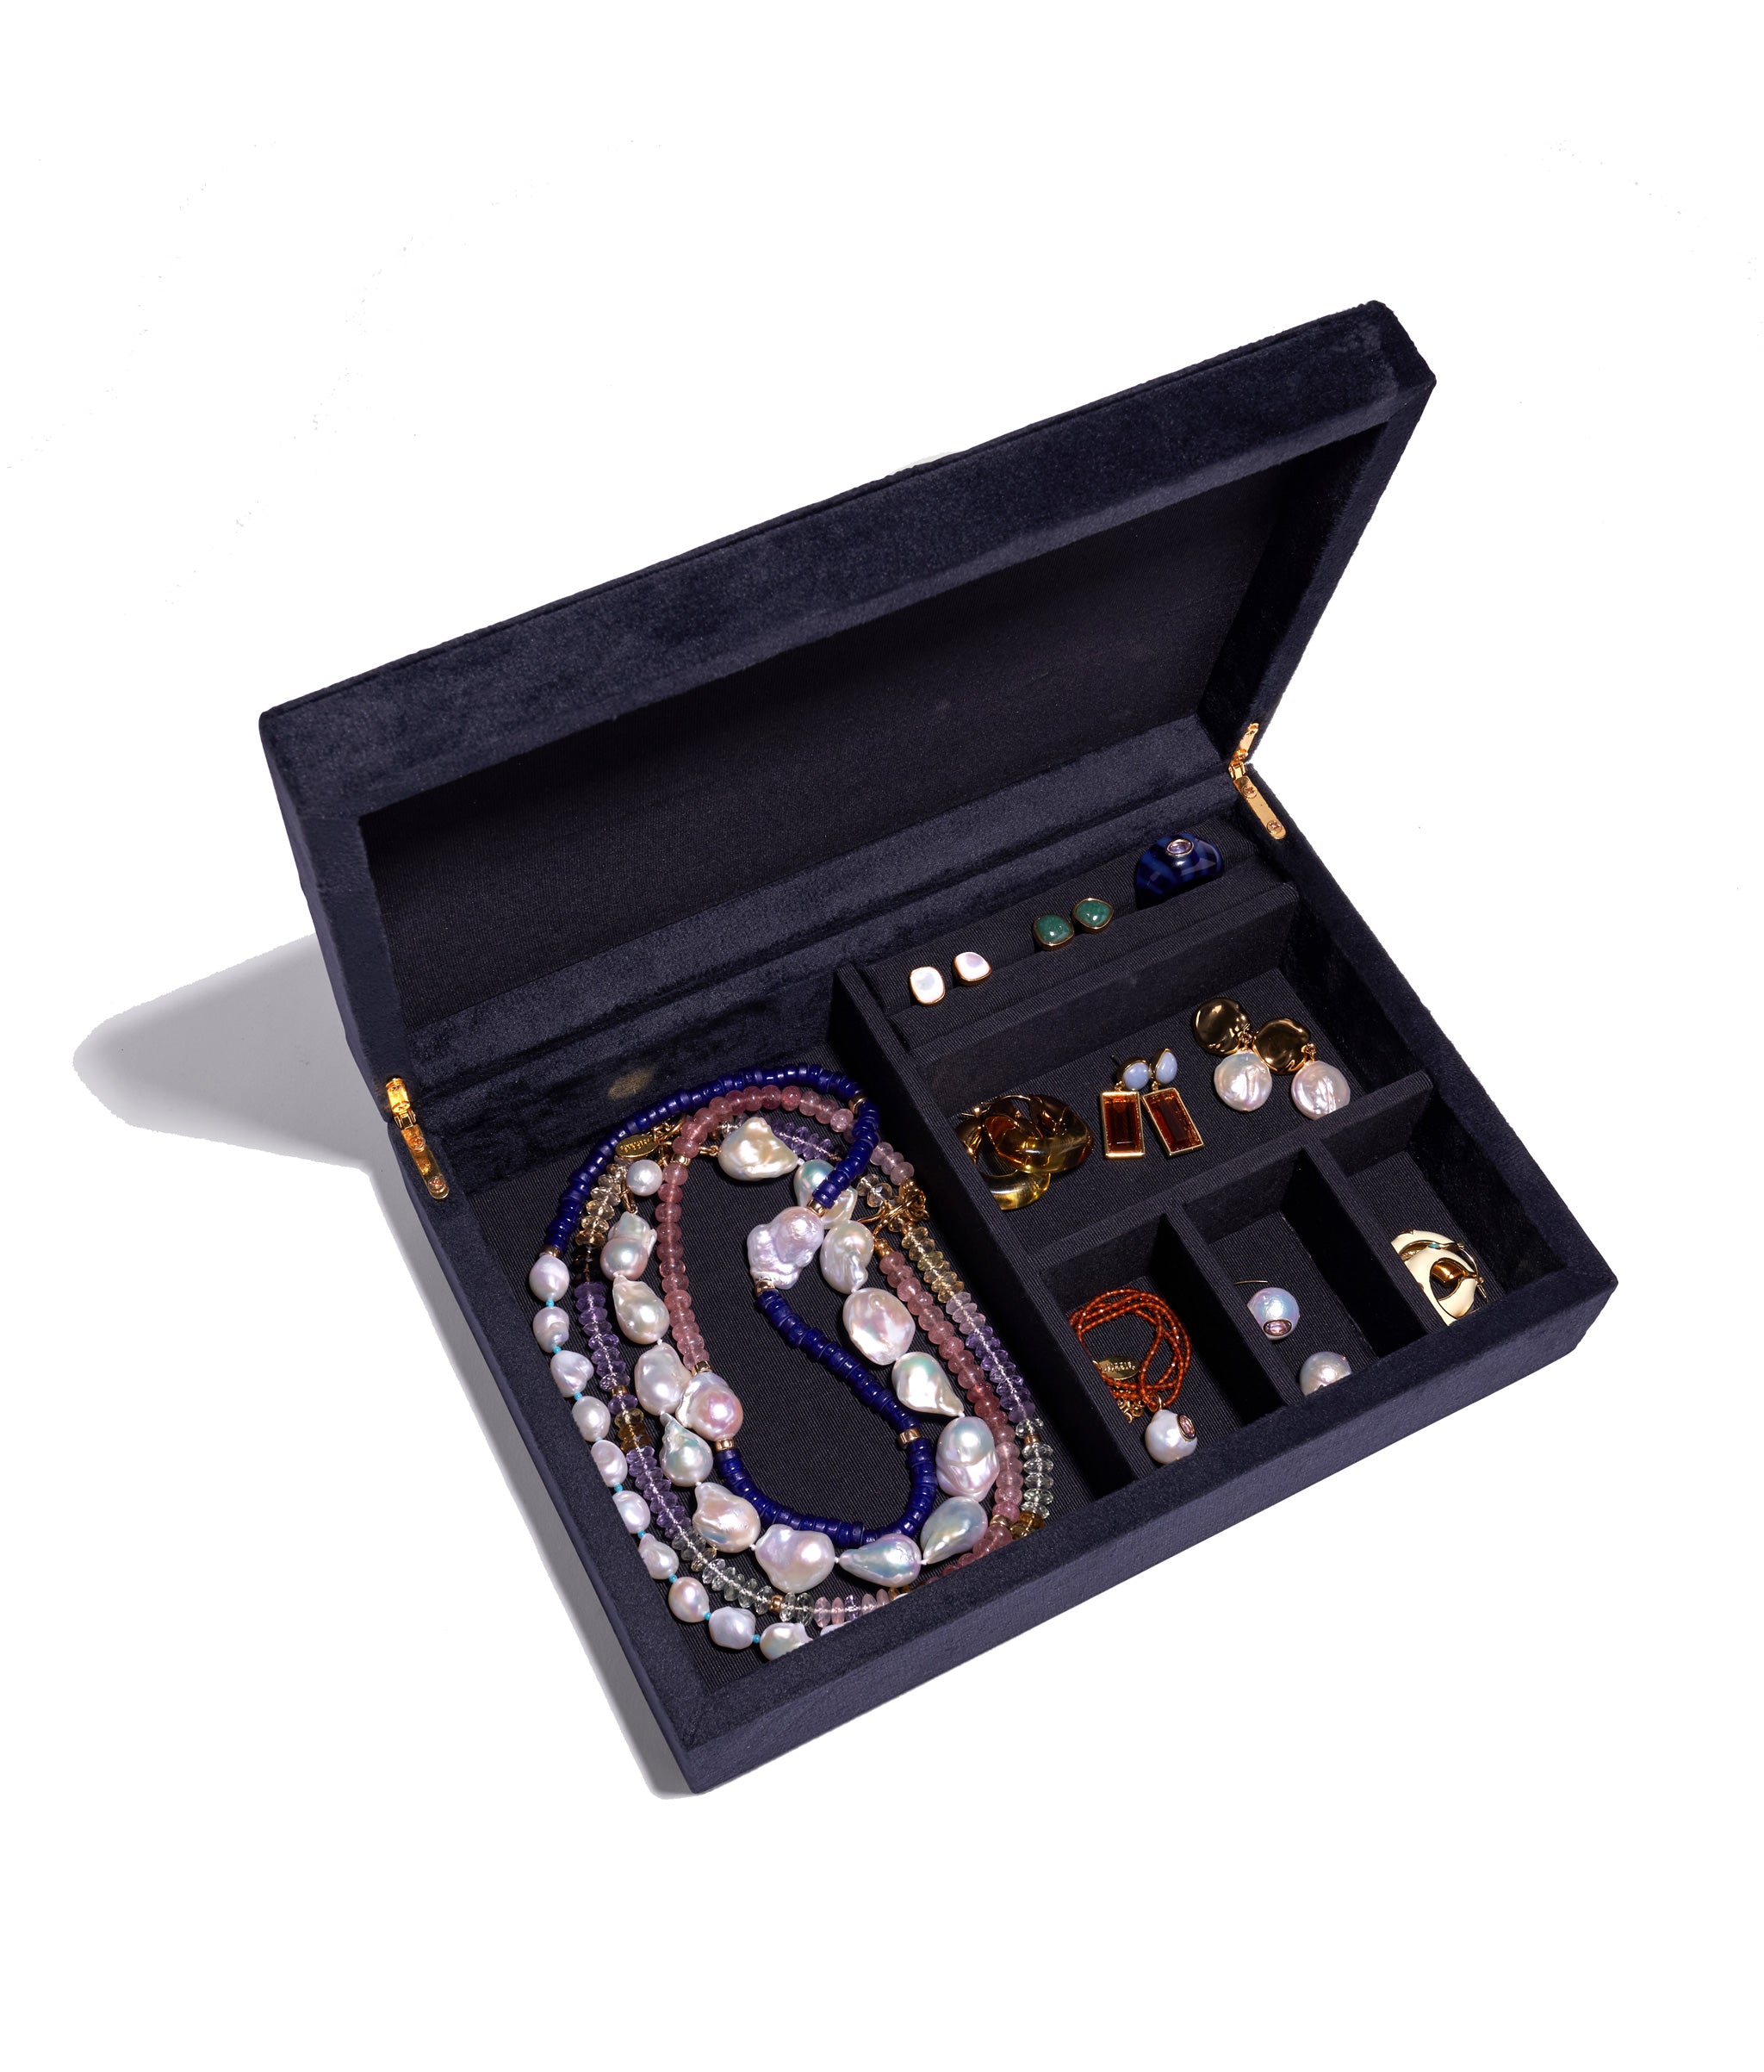 Modern Love Jewelry Box with top open to display assorted colorful jewelry stored in its compartments.